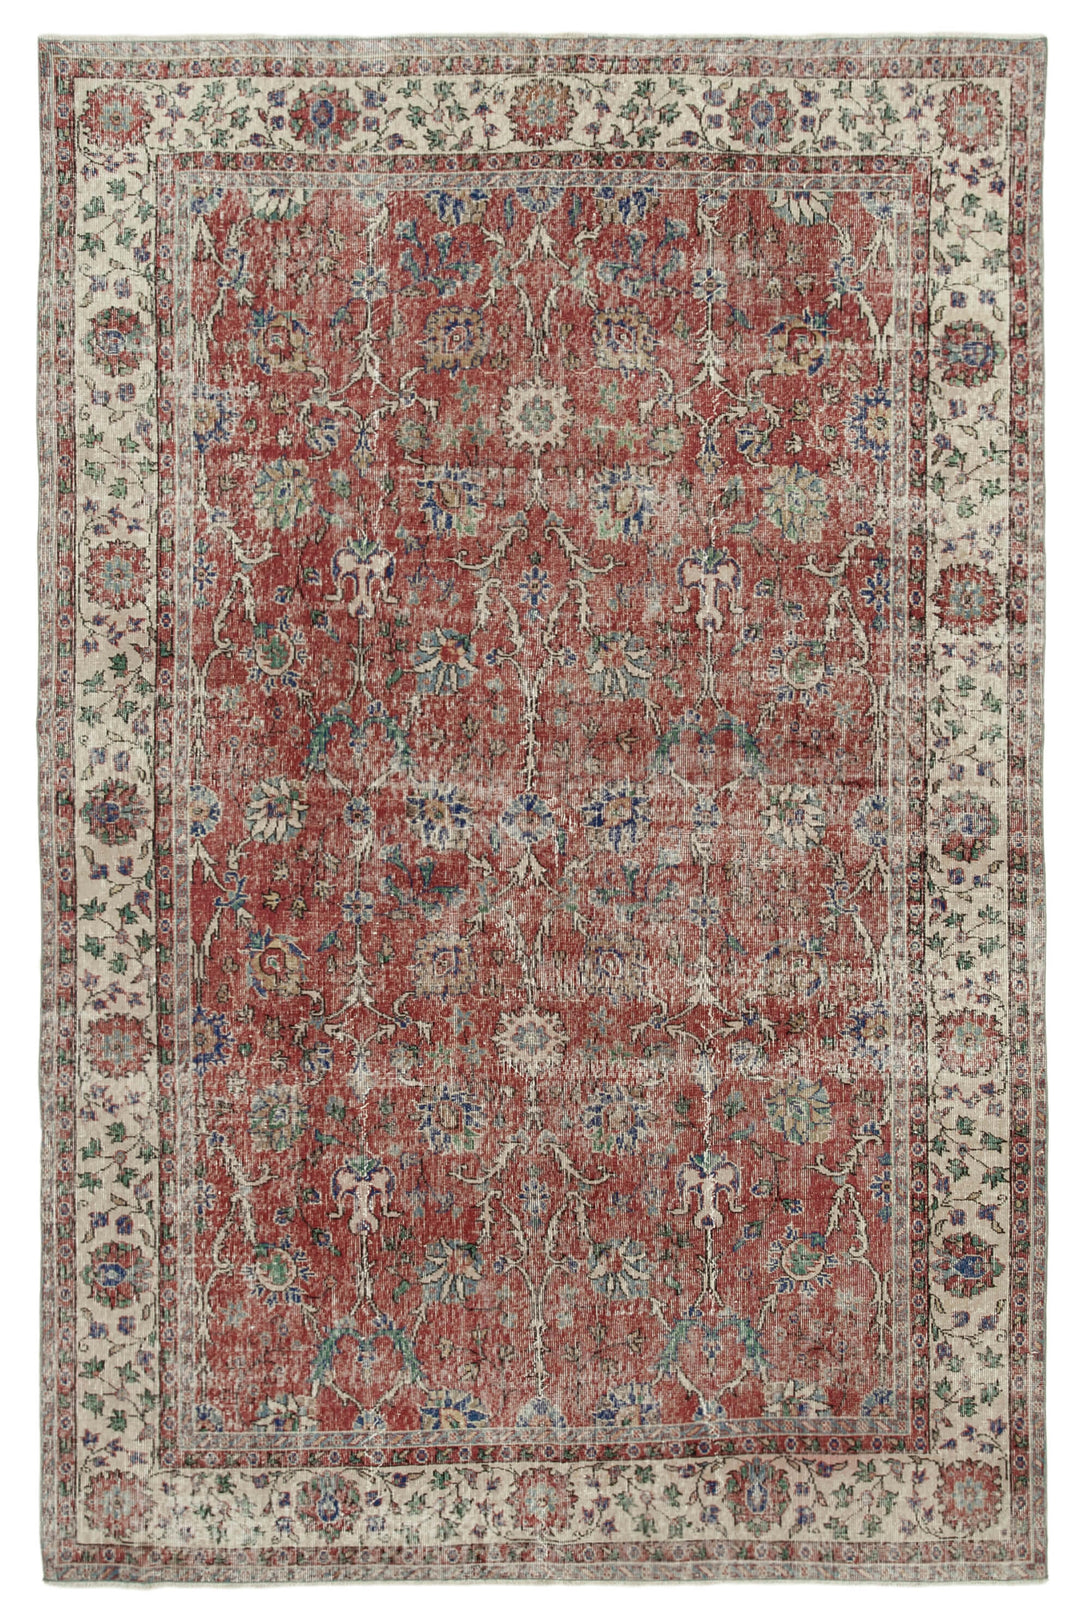 Handmade White Wash Area Rug > Design# OL-AC-36852 > Size: 6'-11" x 10'-1", Carpet Culture Rugs, Handmade Rugs, NYC Rugs, New Rugs, Shop Rugs, Rug Store, Outlet Rugs, SoHo Rugs, Rugs in USA